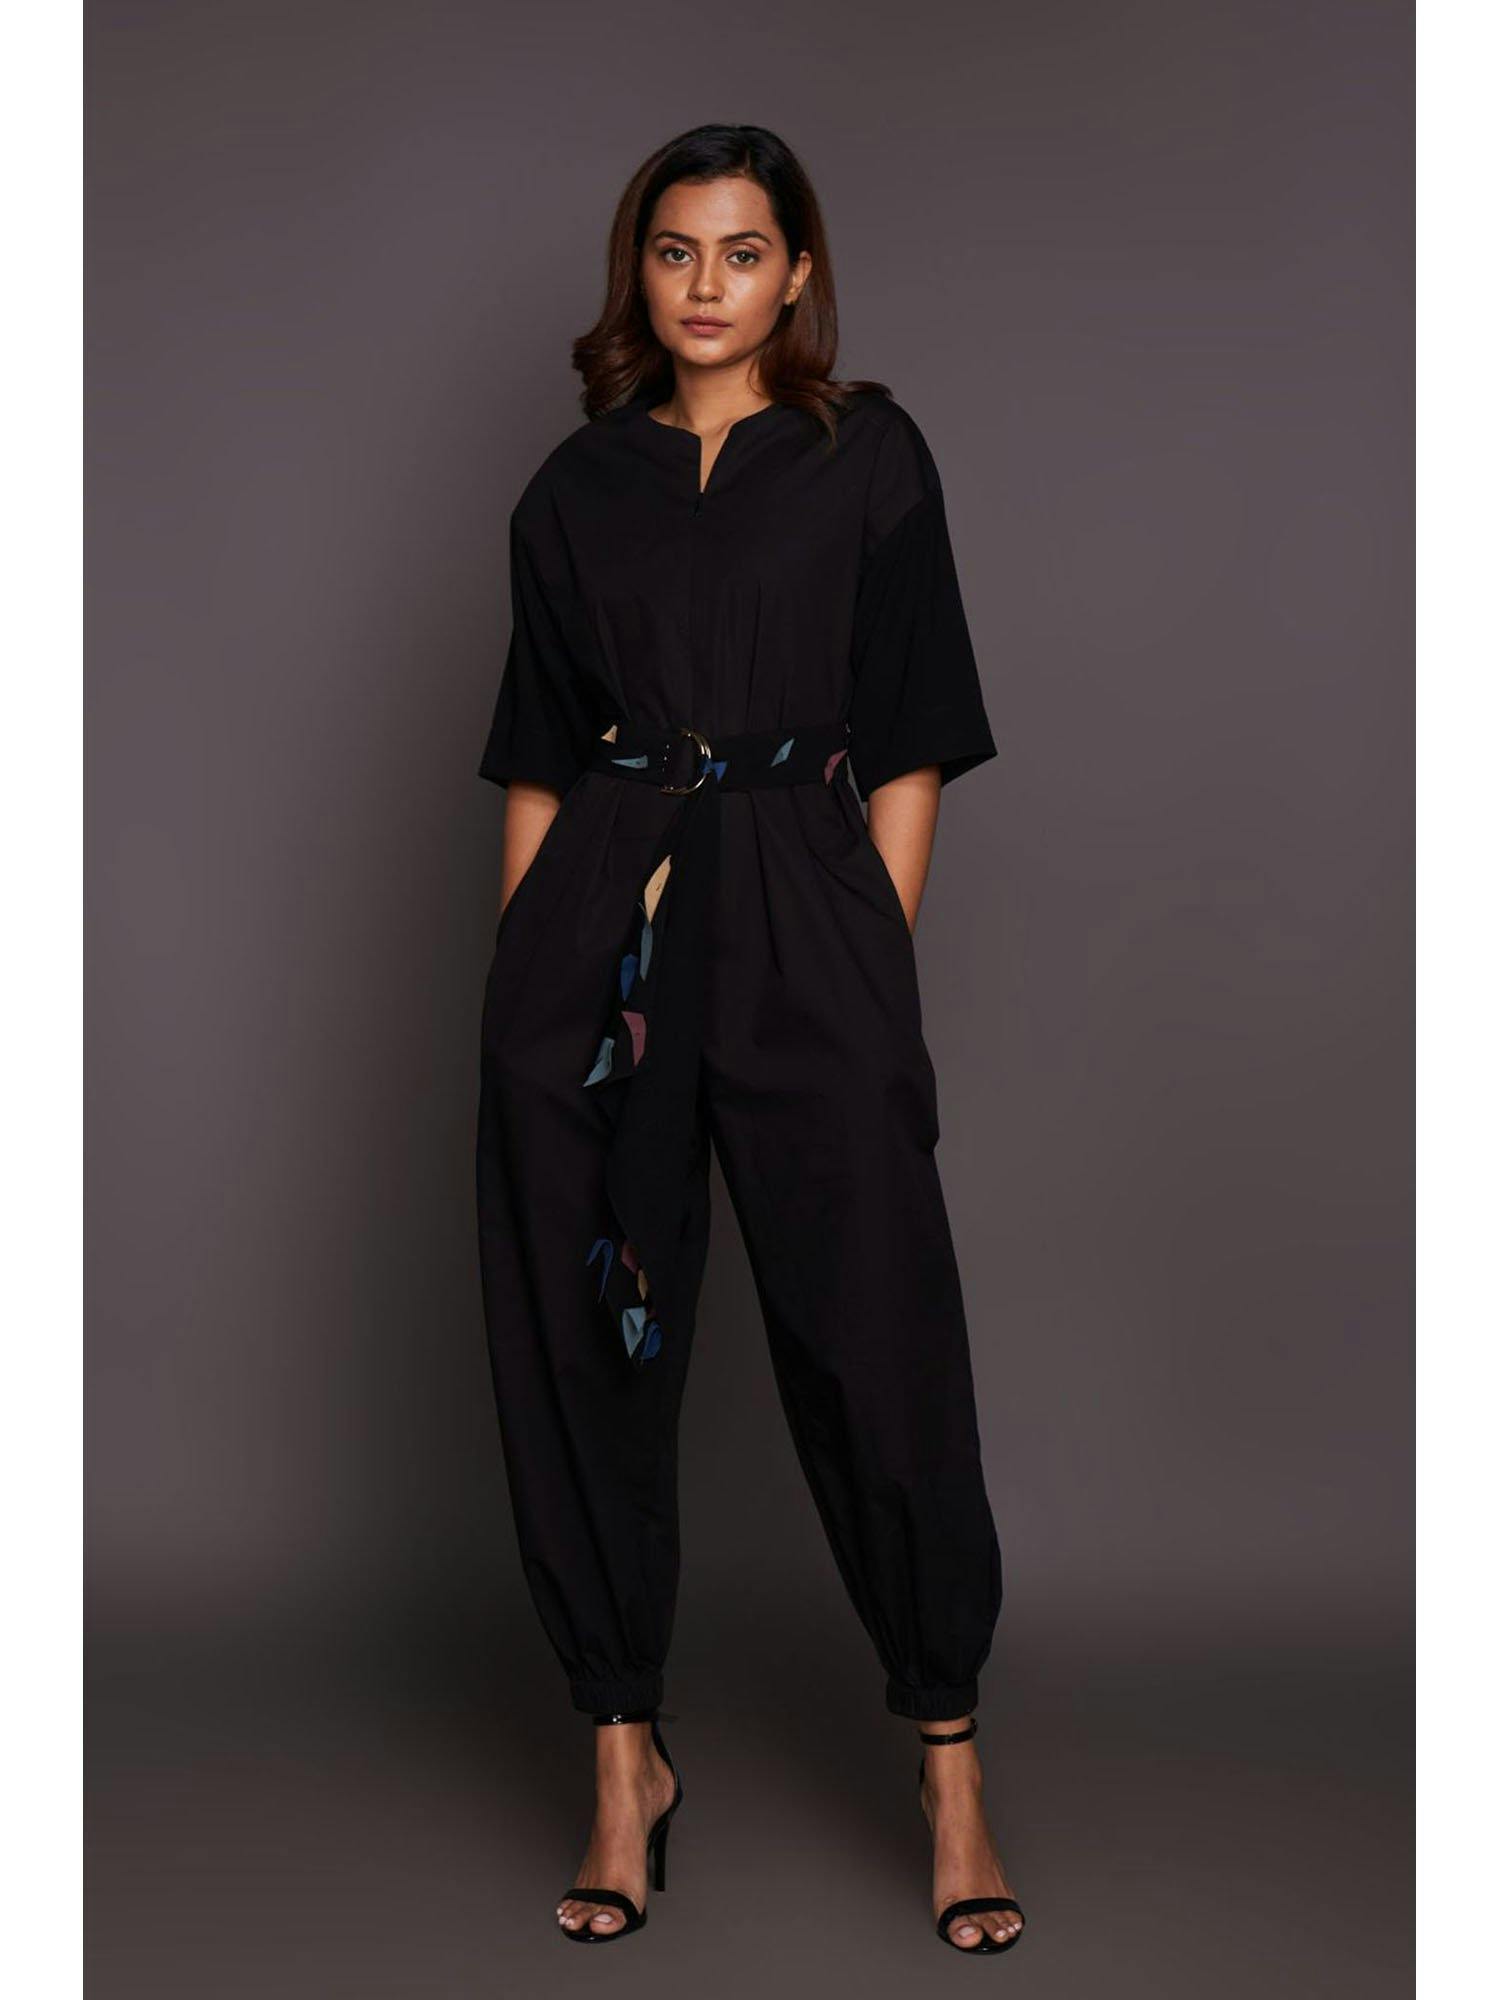 black jumpsuit with belt, a product by Deepika Arora